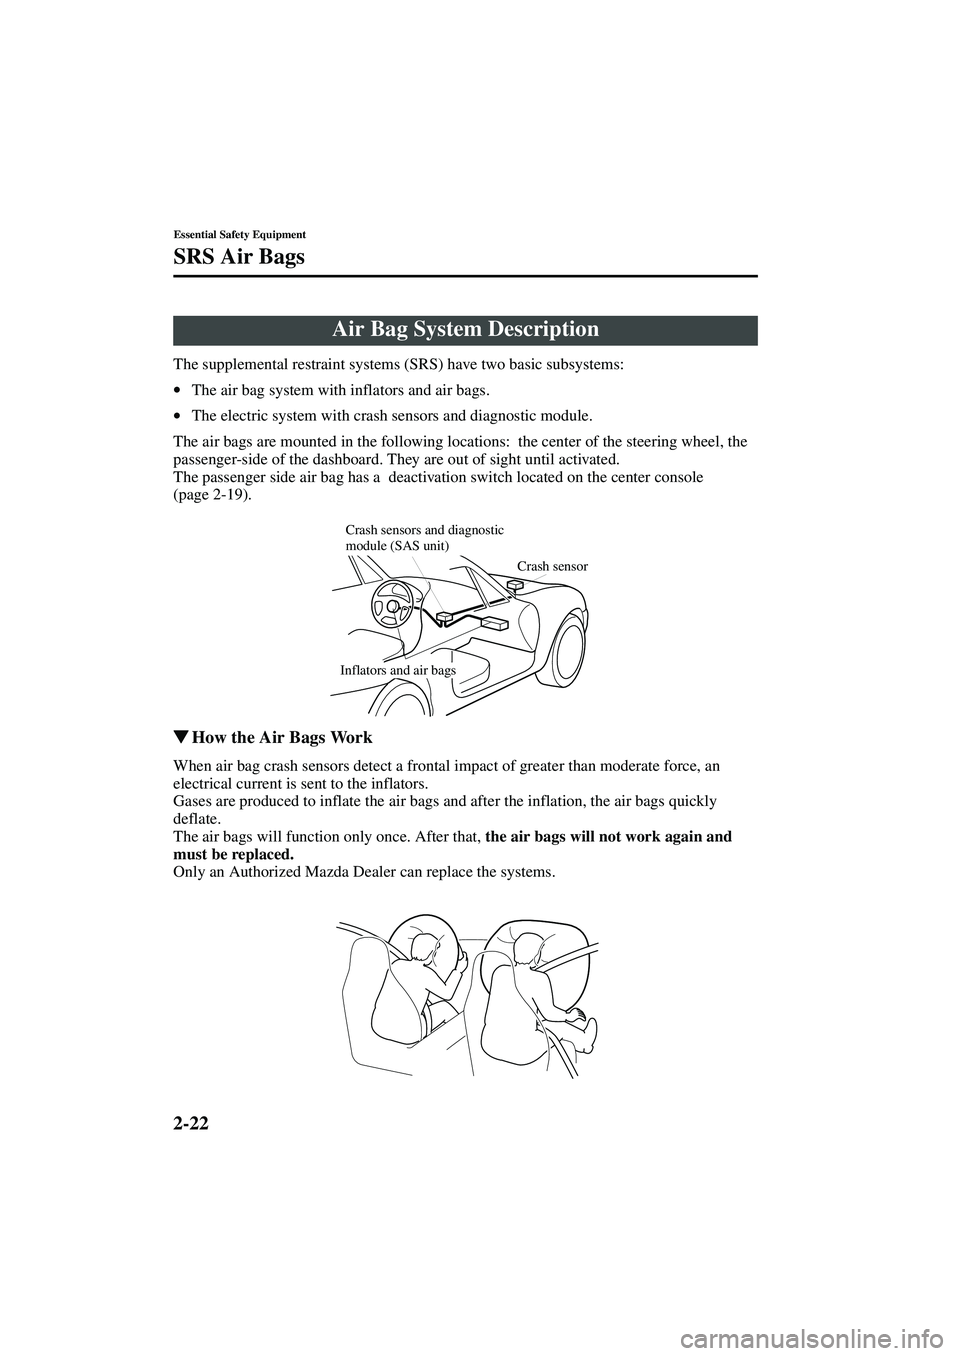 MAZDA MODEL MX-5 MIATA 2002  Owners Manual 2-22
Essential Safety Equipment
SRS Air Bags
Form No. 8Q42-EA-01F
The supplemental restraint systems (SRS) have two basic subsystems:
•The air bag system with inflators and air bags.
• The electri